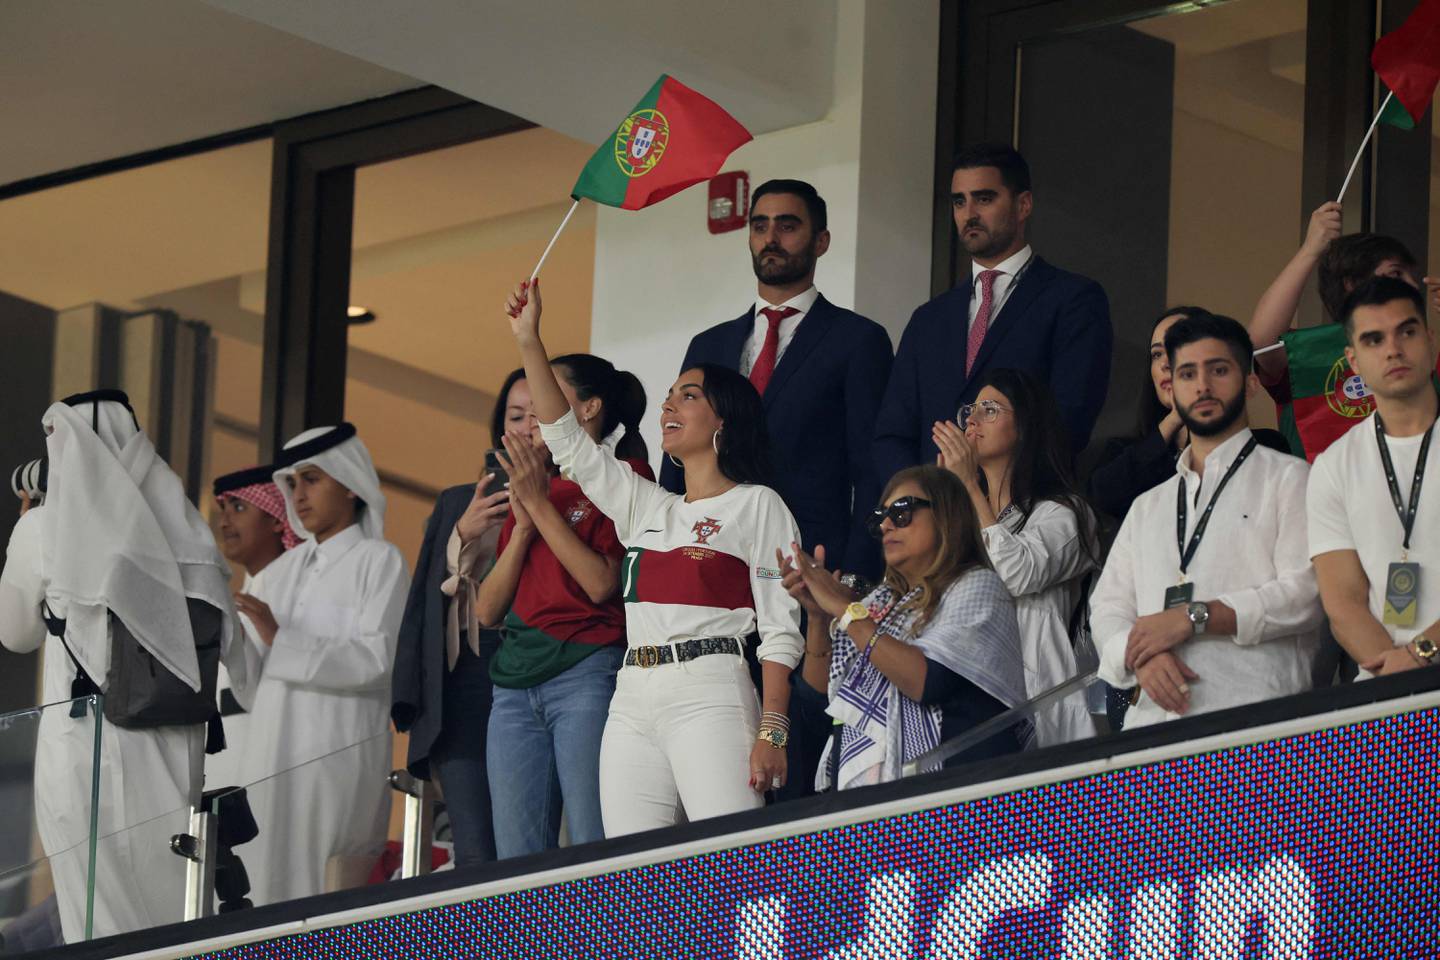 Georgina Rodriguez, centre, waves a Portugal flag before the start of the World Cup quarterfinal match between Morocco and Portugal at Al Thumama Stadium in Doha on December 10, 2022. AFP